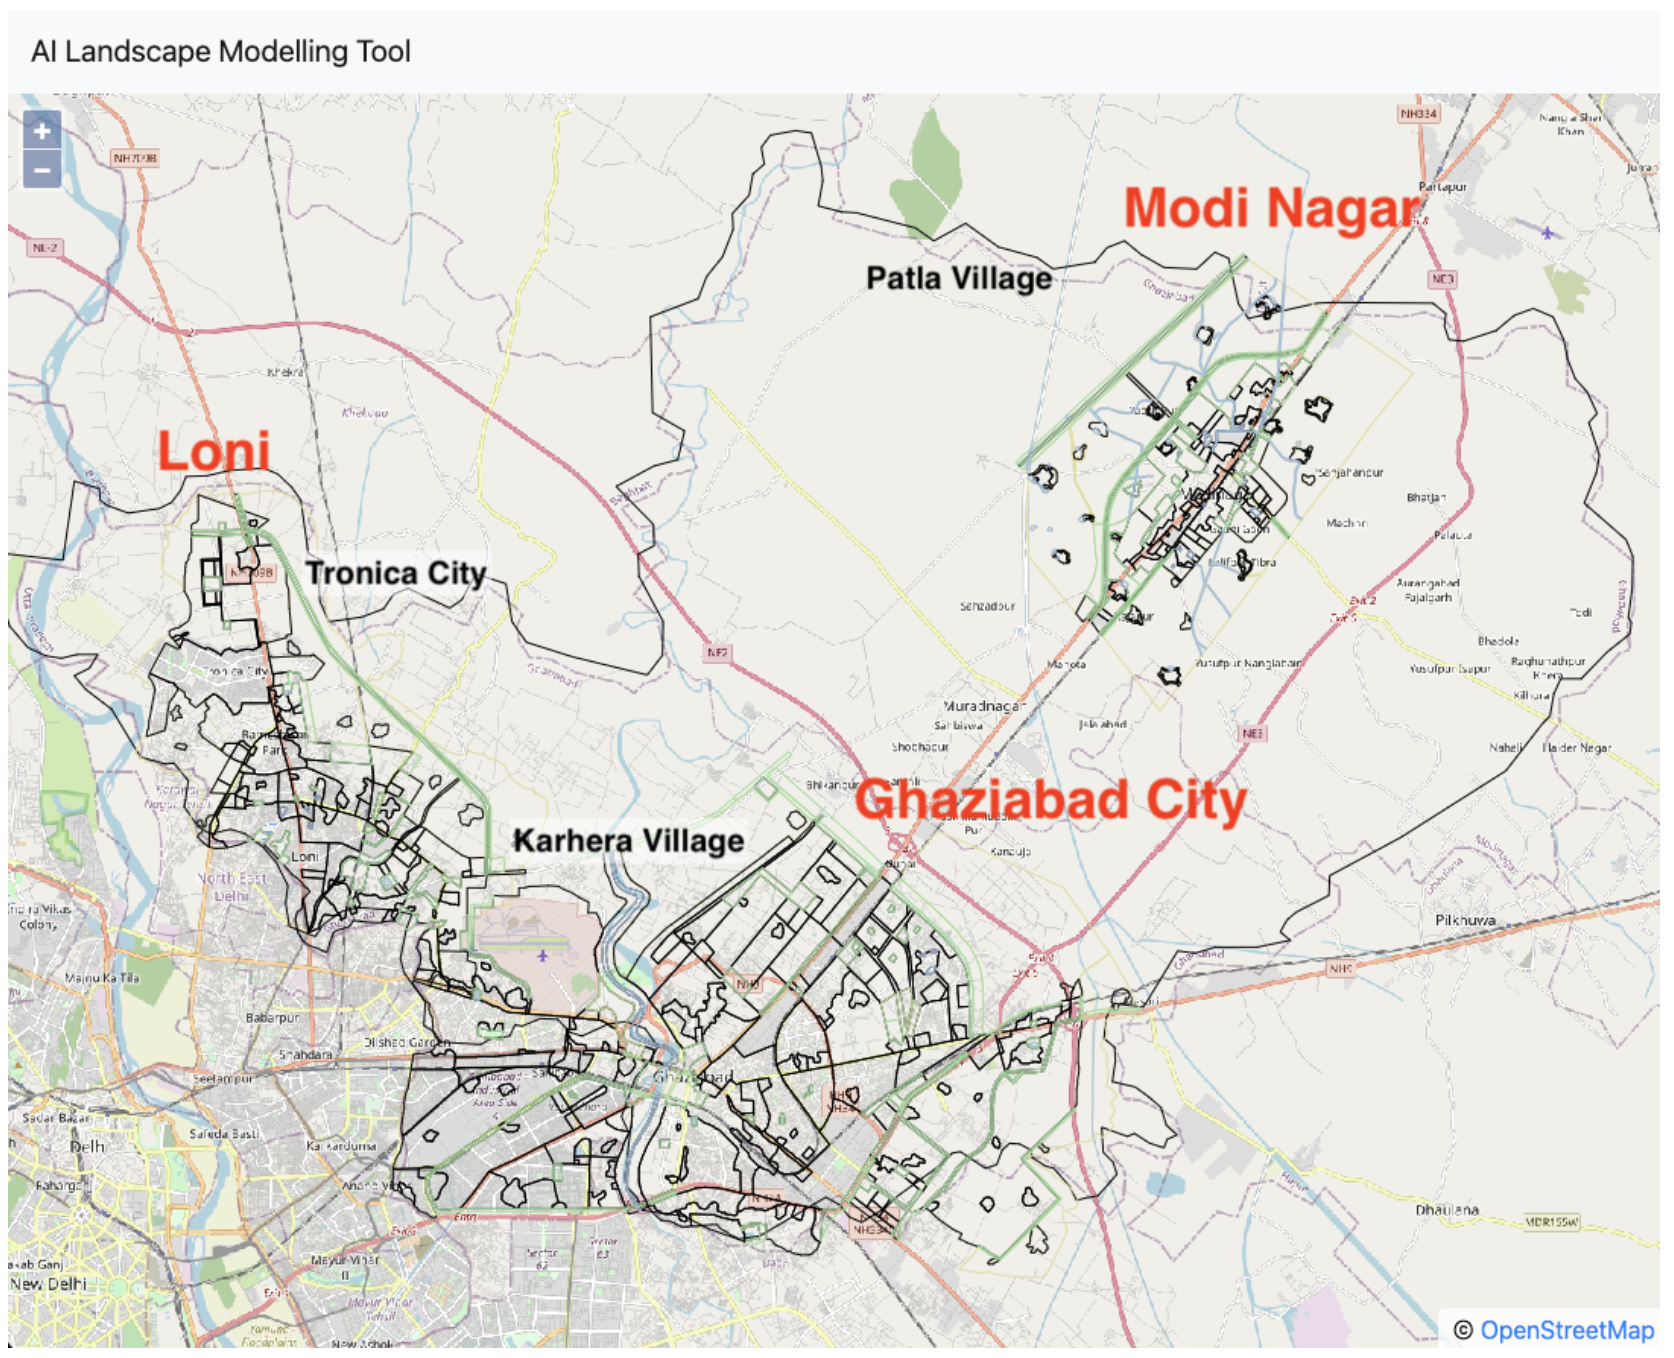 Map of Ghaziabad district showing three masterplan areas